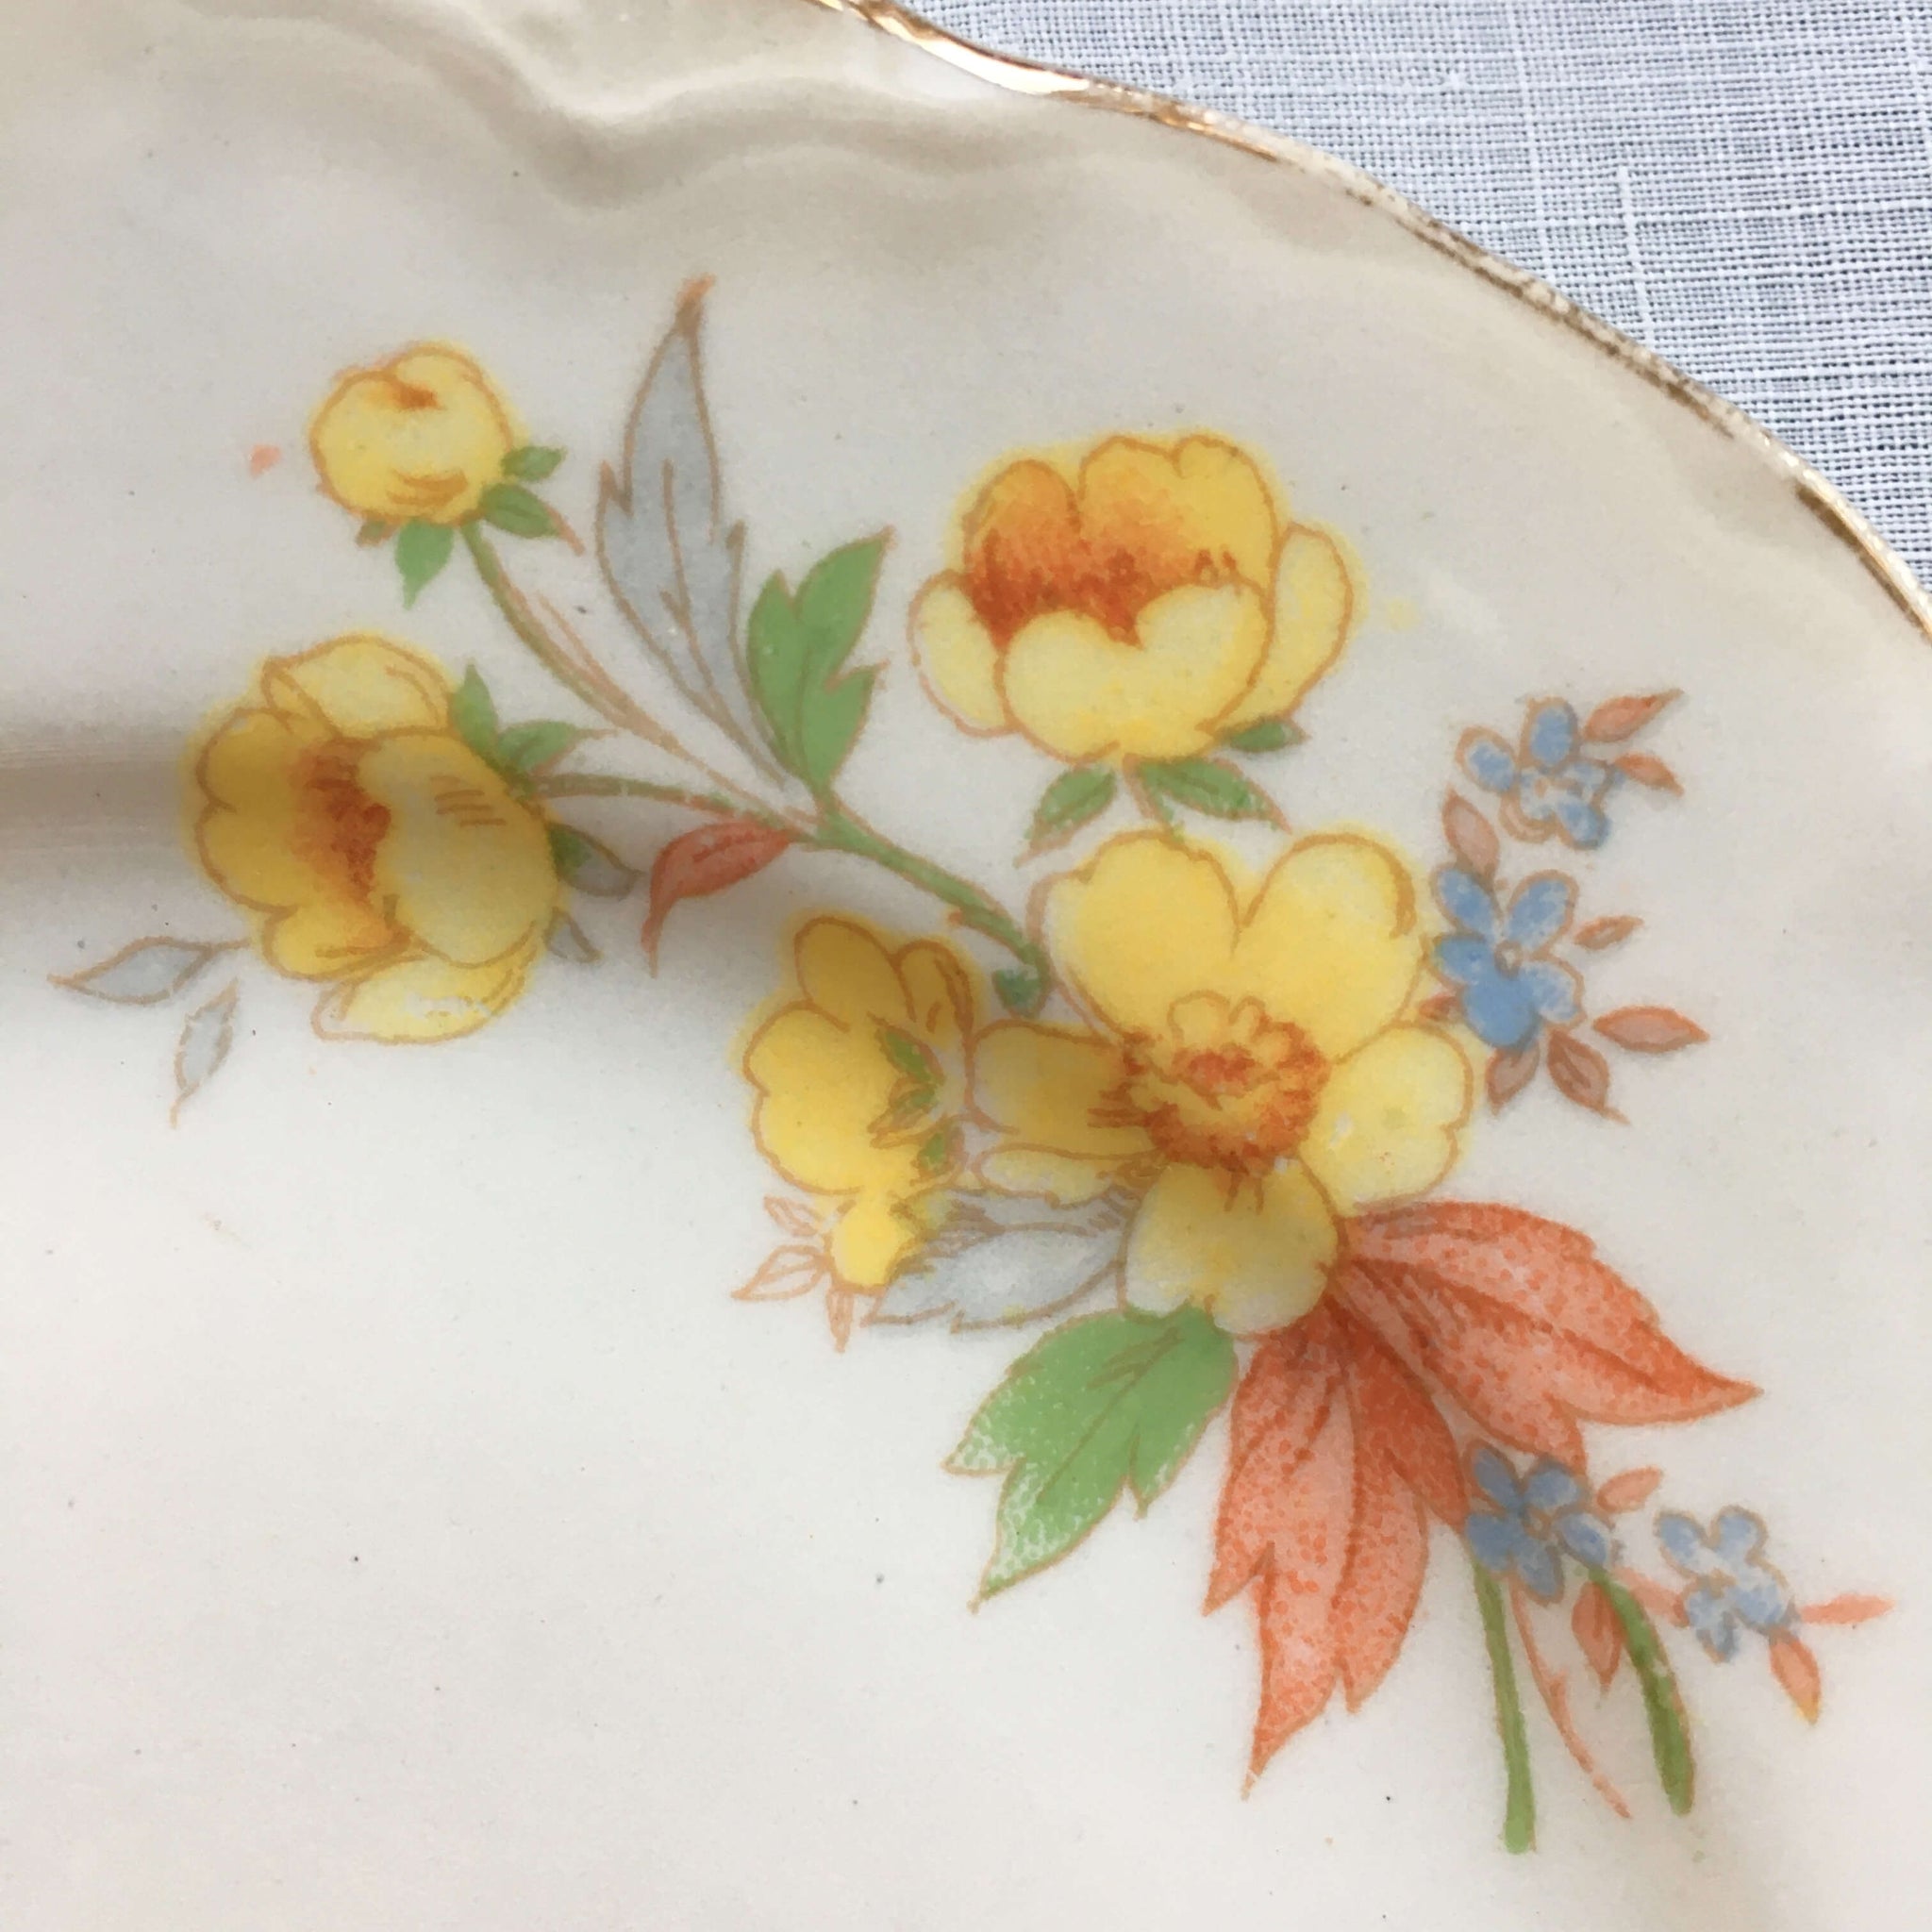 Vintage 1940s Yellow Floral Bread and Butter Plates - Homer Laughlin Susan Pattern - Set of 3 circa 1948